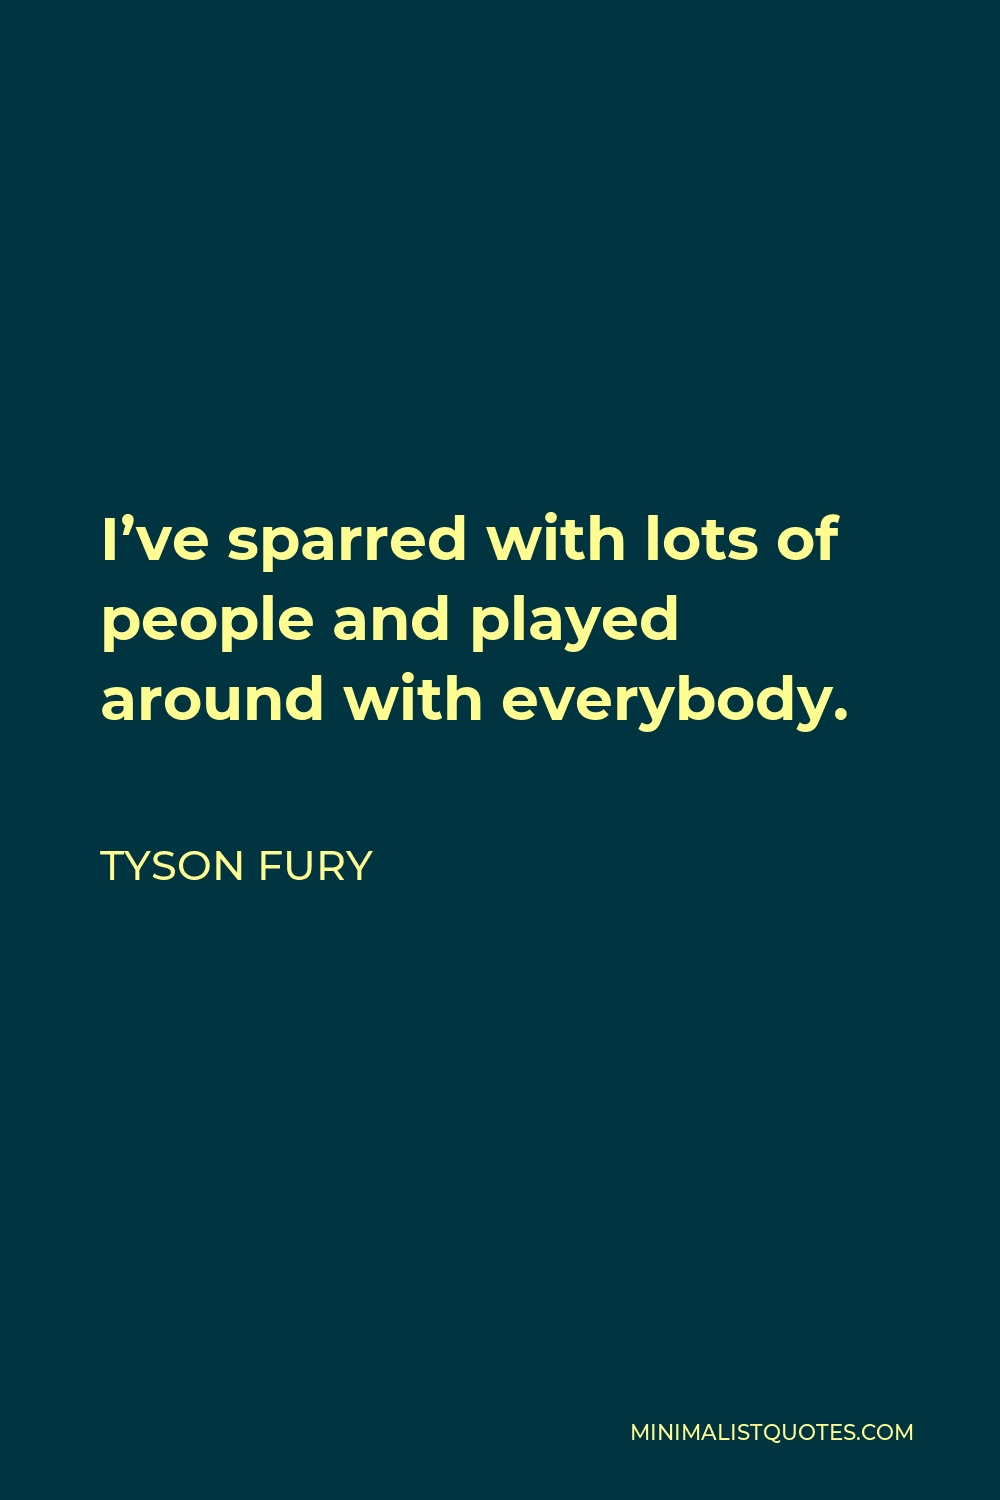 Tyson Fury Quote - I’ve sparred with lots of people and played around with everybody.